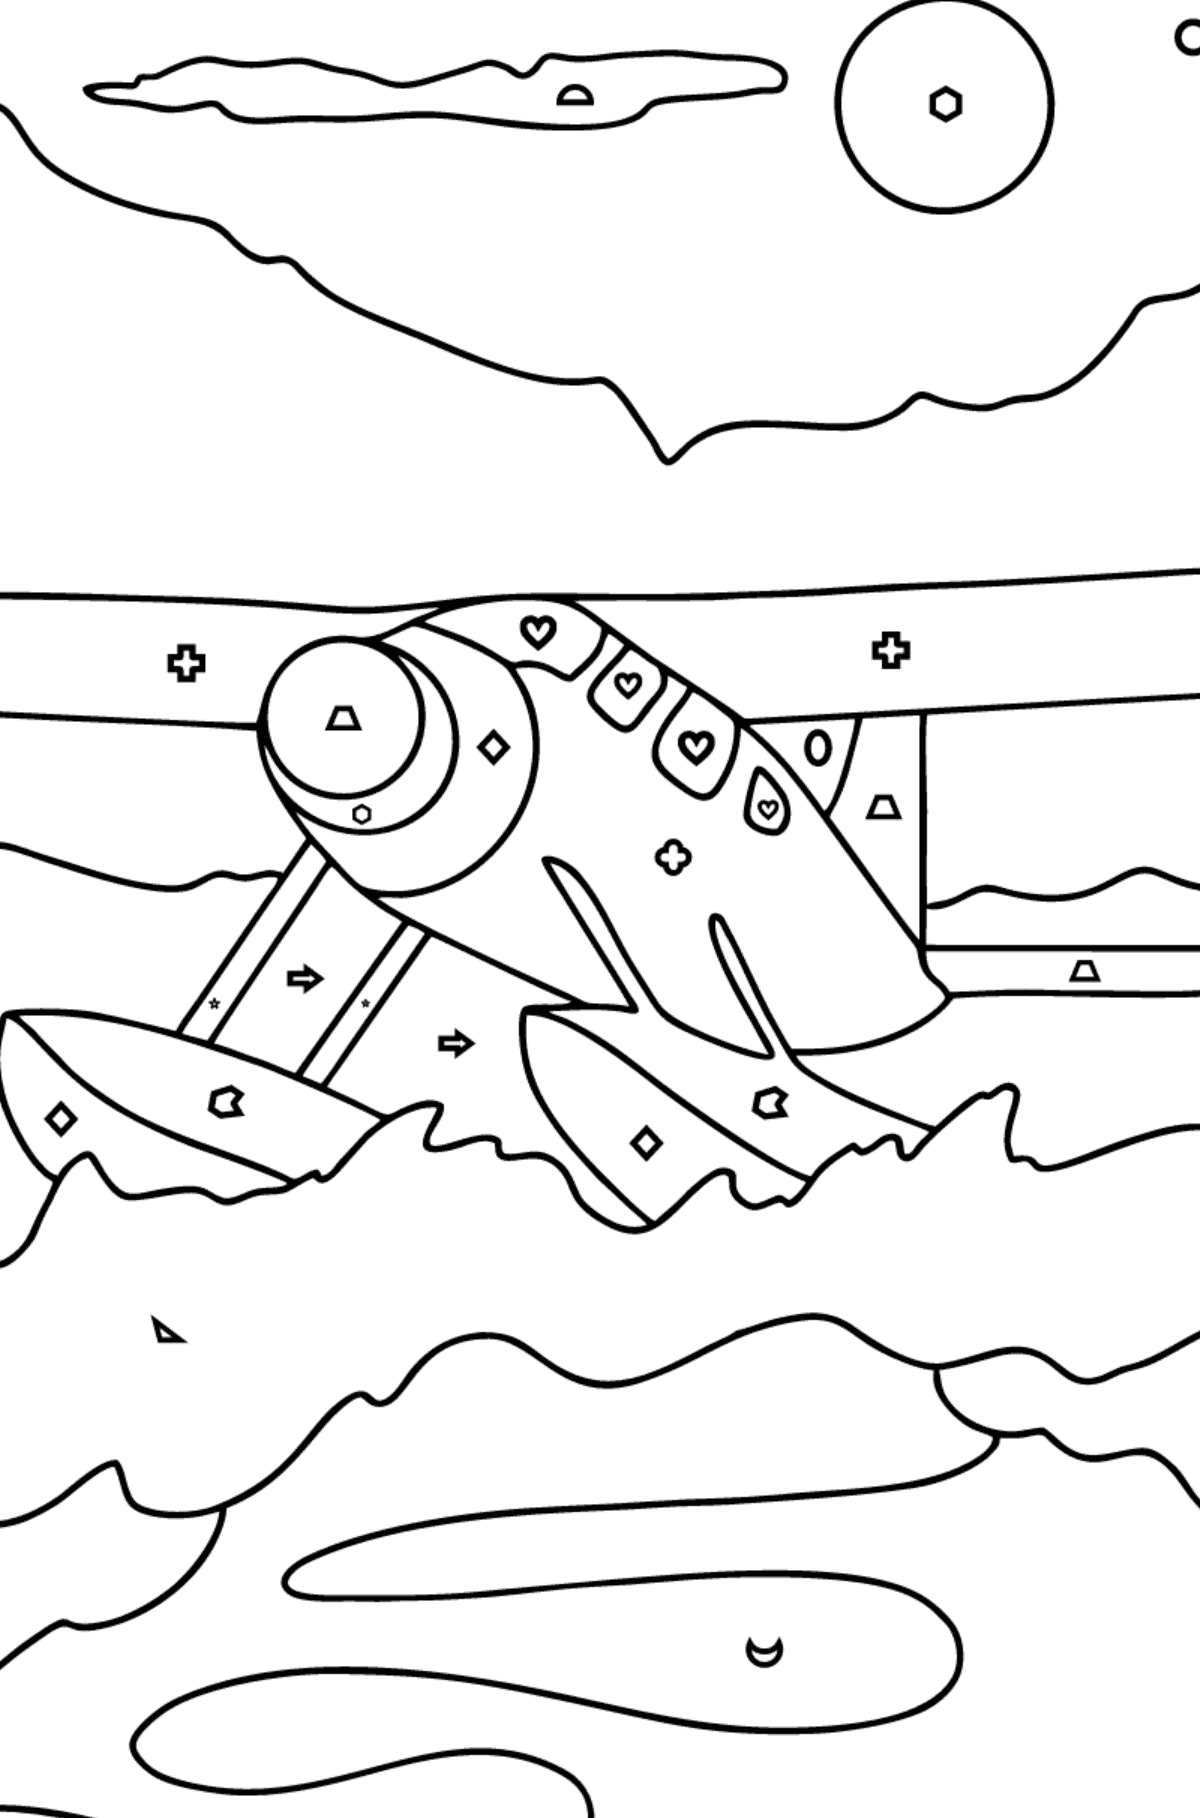 Coloring Page - A Hydroplane - Coloring by Geometric Shapes for Kids